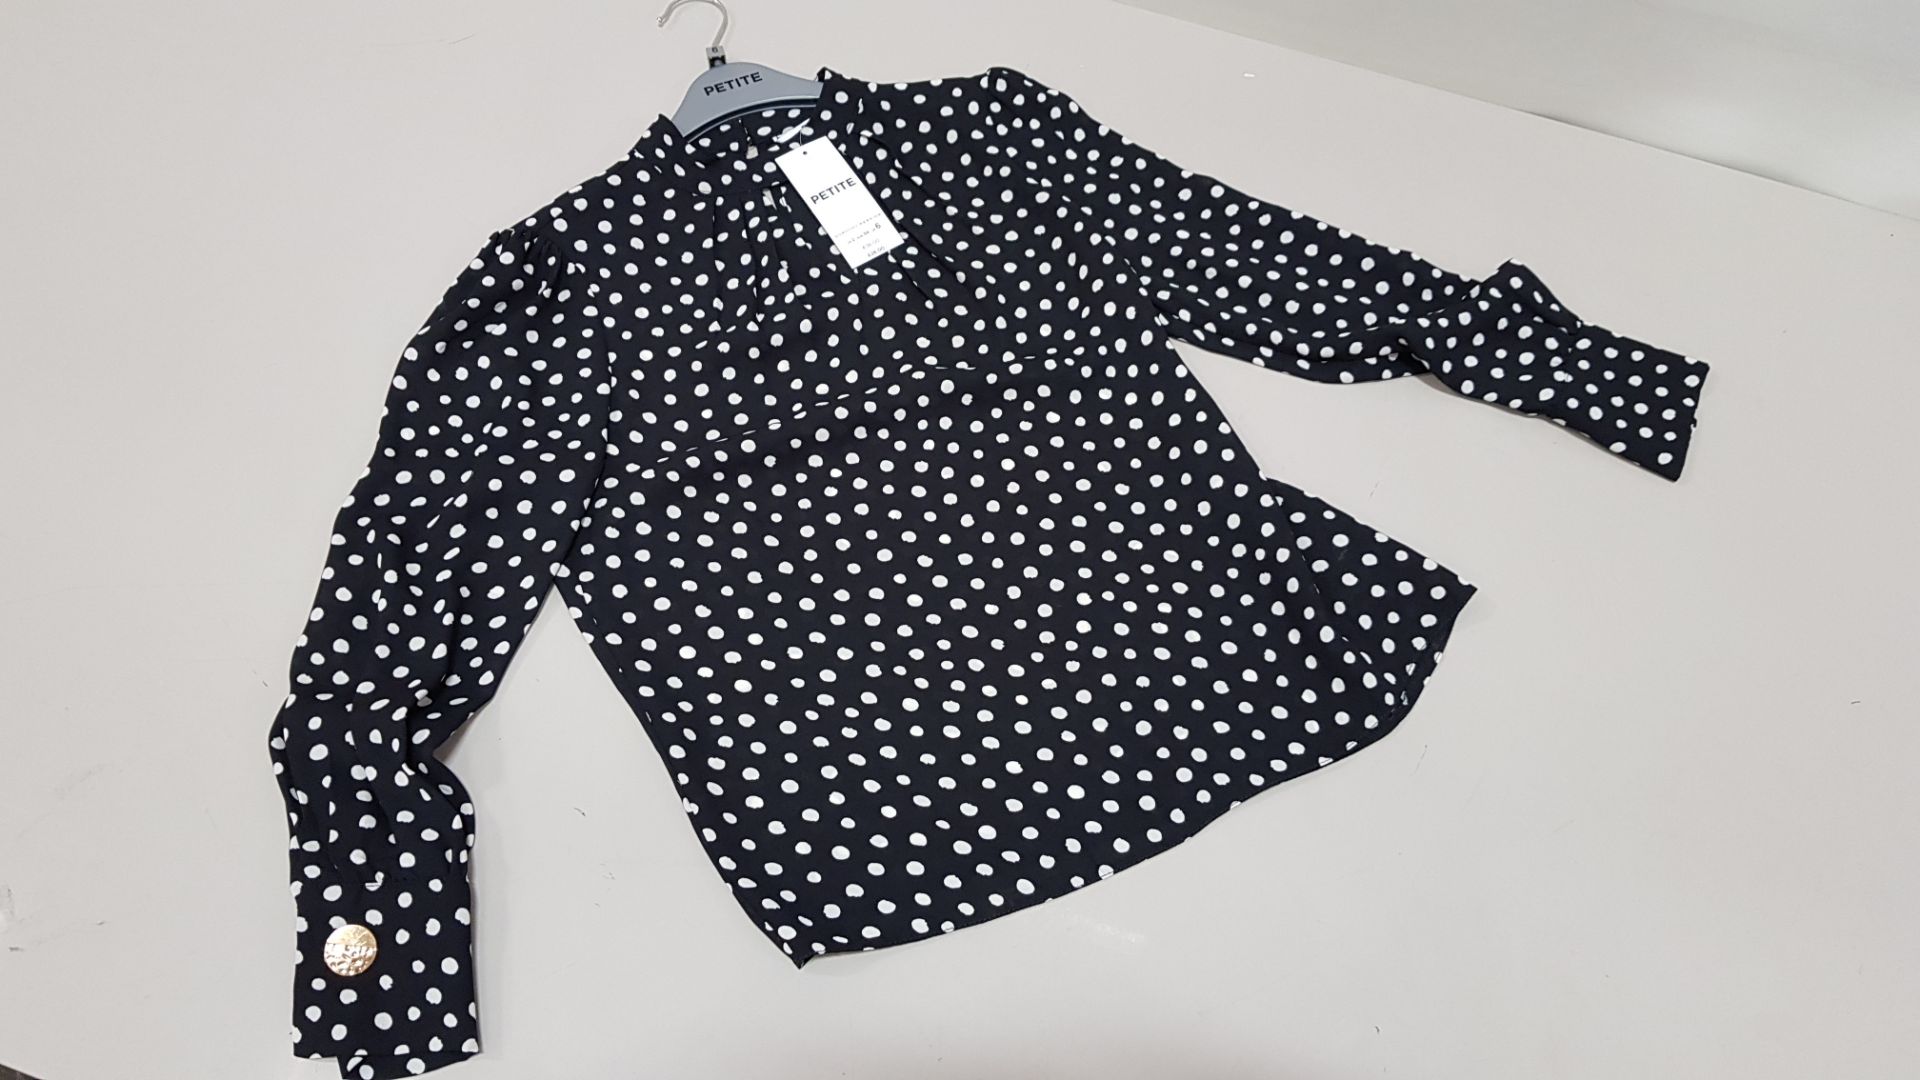 12 X BRAND NEW DOROTHY PERKINS PETITE BLACK AND WHITE DOTTED BLOUSE (SIZE UK 10) RRP £26.00 (TOTAL